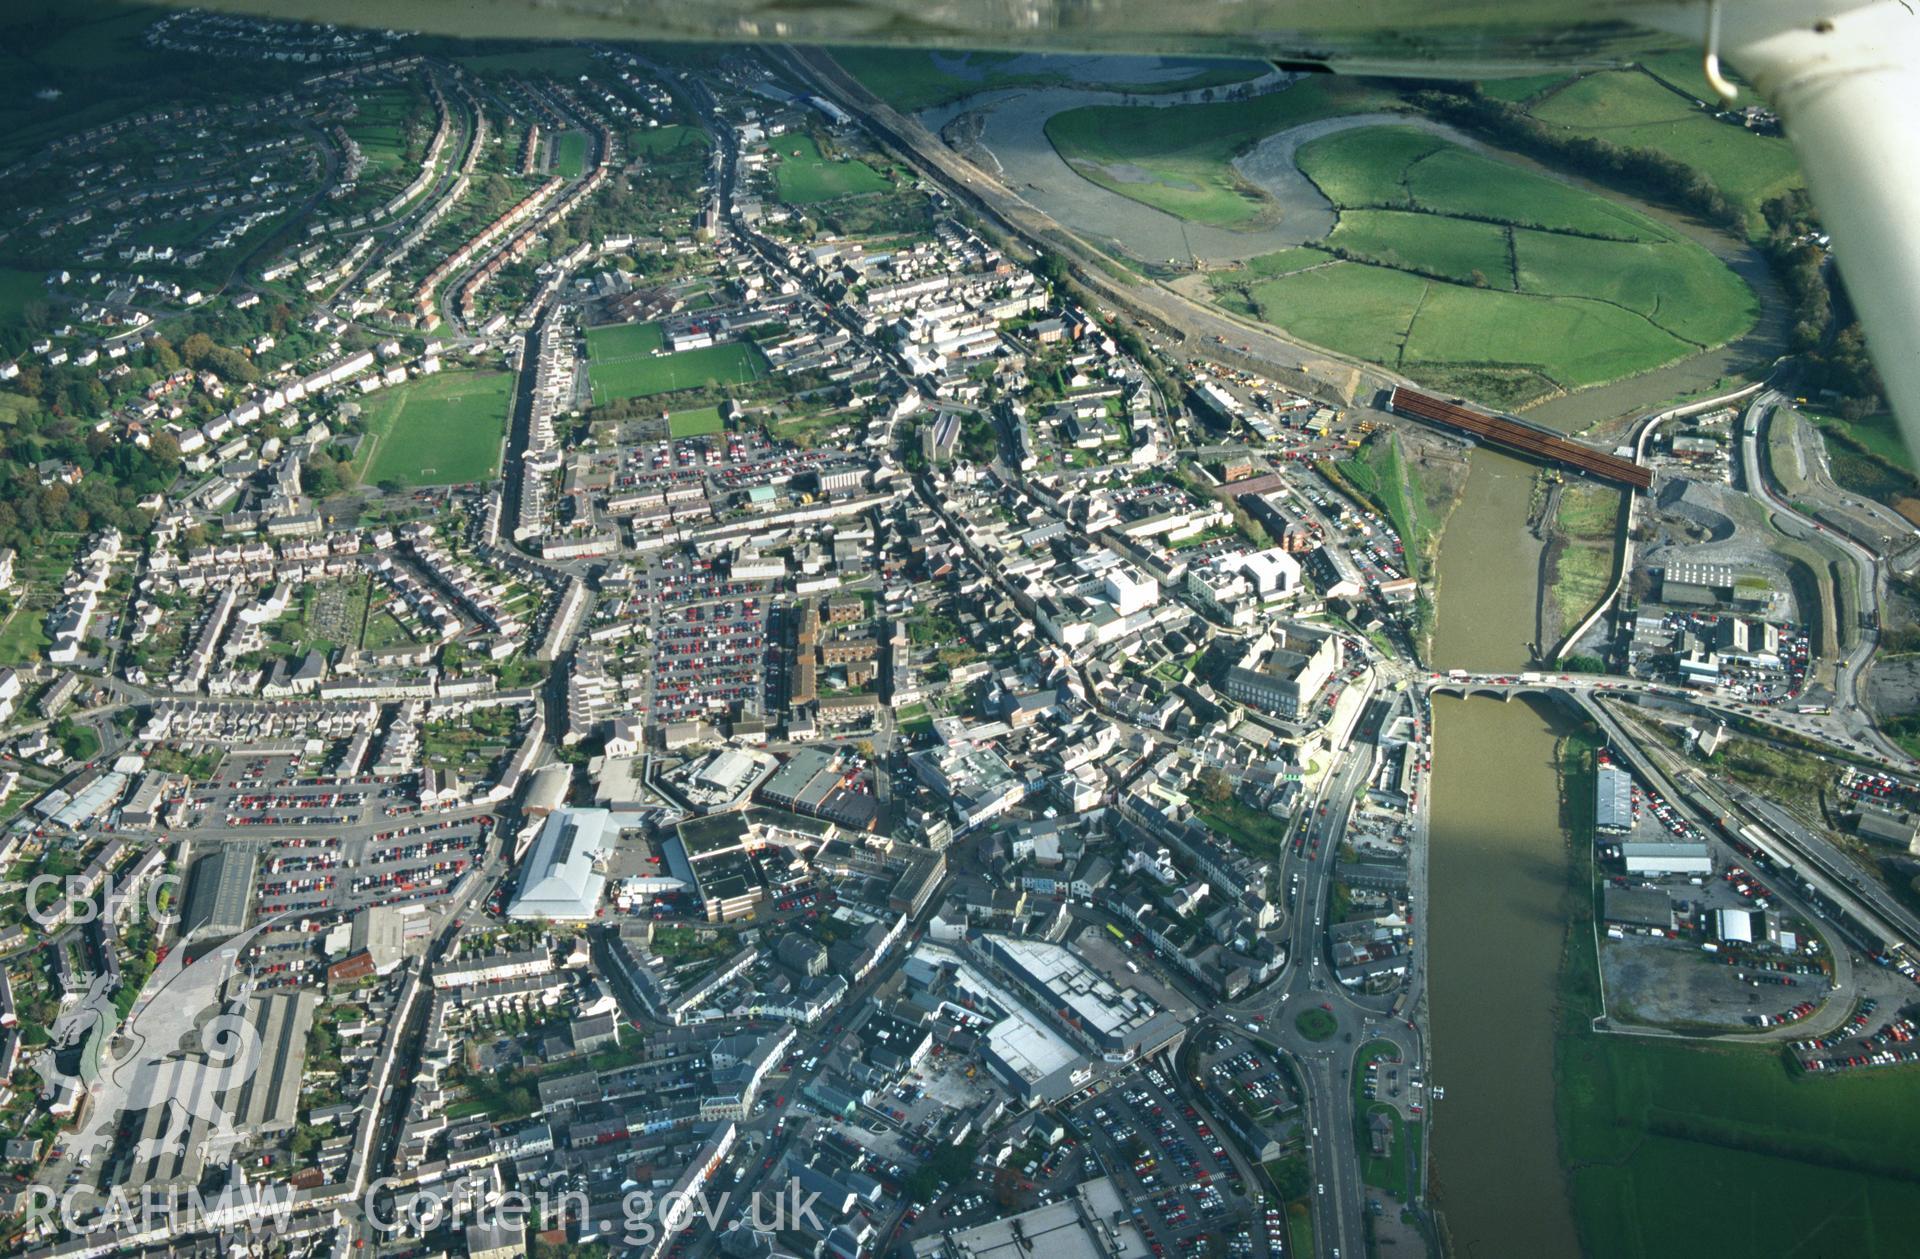 RCAHMW colour slide oblique aerial photograph of Carmarthen, taken on 30/10/1998 by Toby Driver